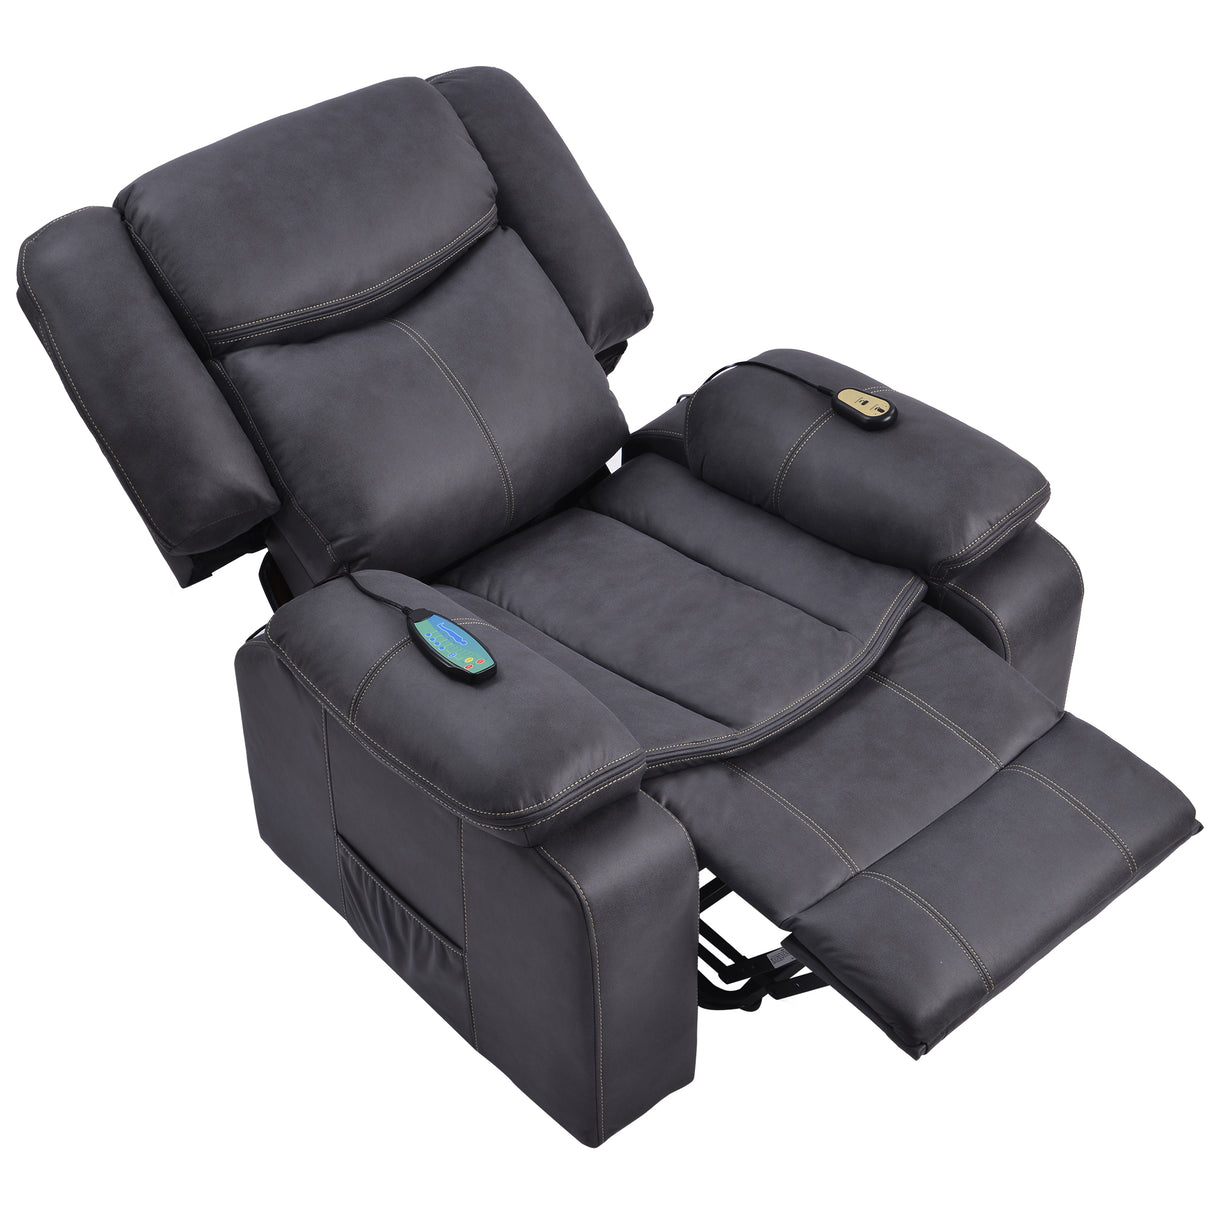 Orisfur. Power Lift Chair for Elderly with Adjustable Massage Function, Recliner Chair with Heating System for Living Room Home Elegance USA